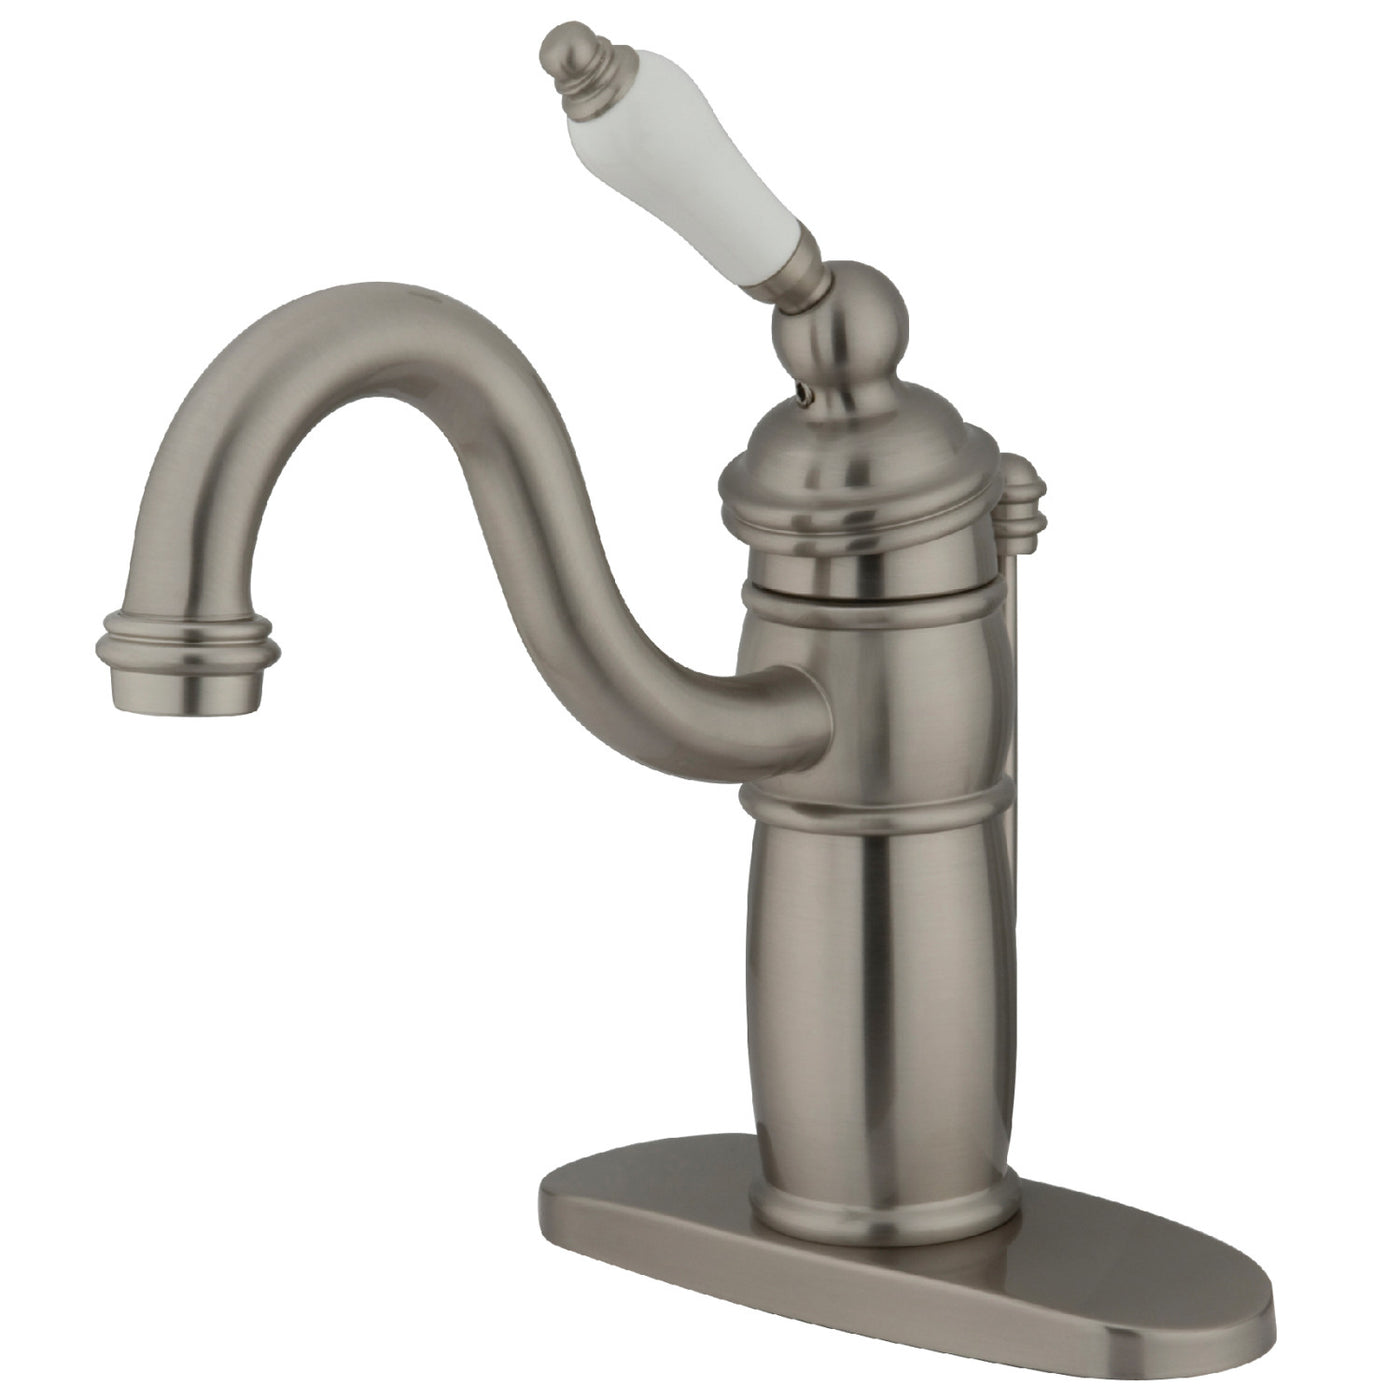 Elements of Design EB1408PL Single-Handle Bathroom Faucet with Pop-Up Drain, Brushed Nickel